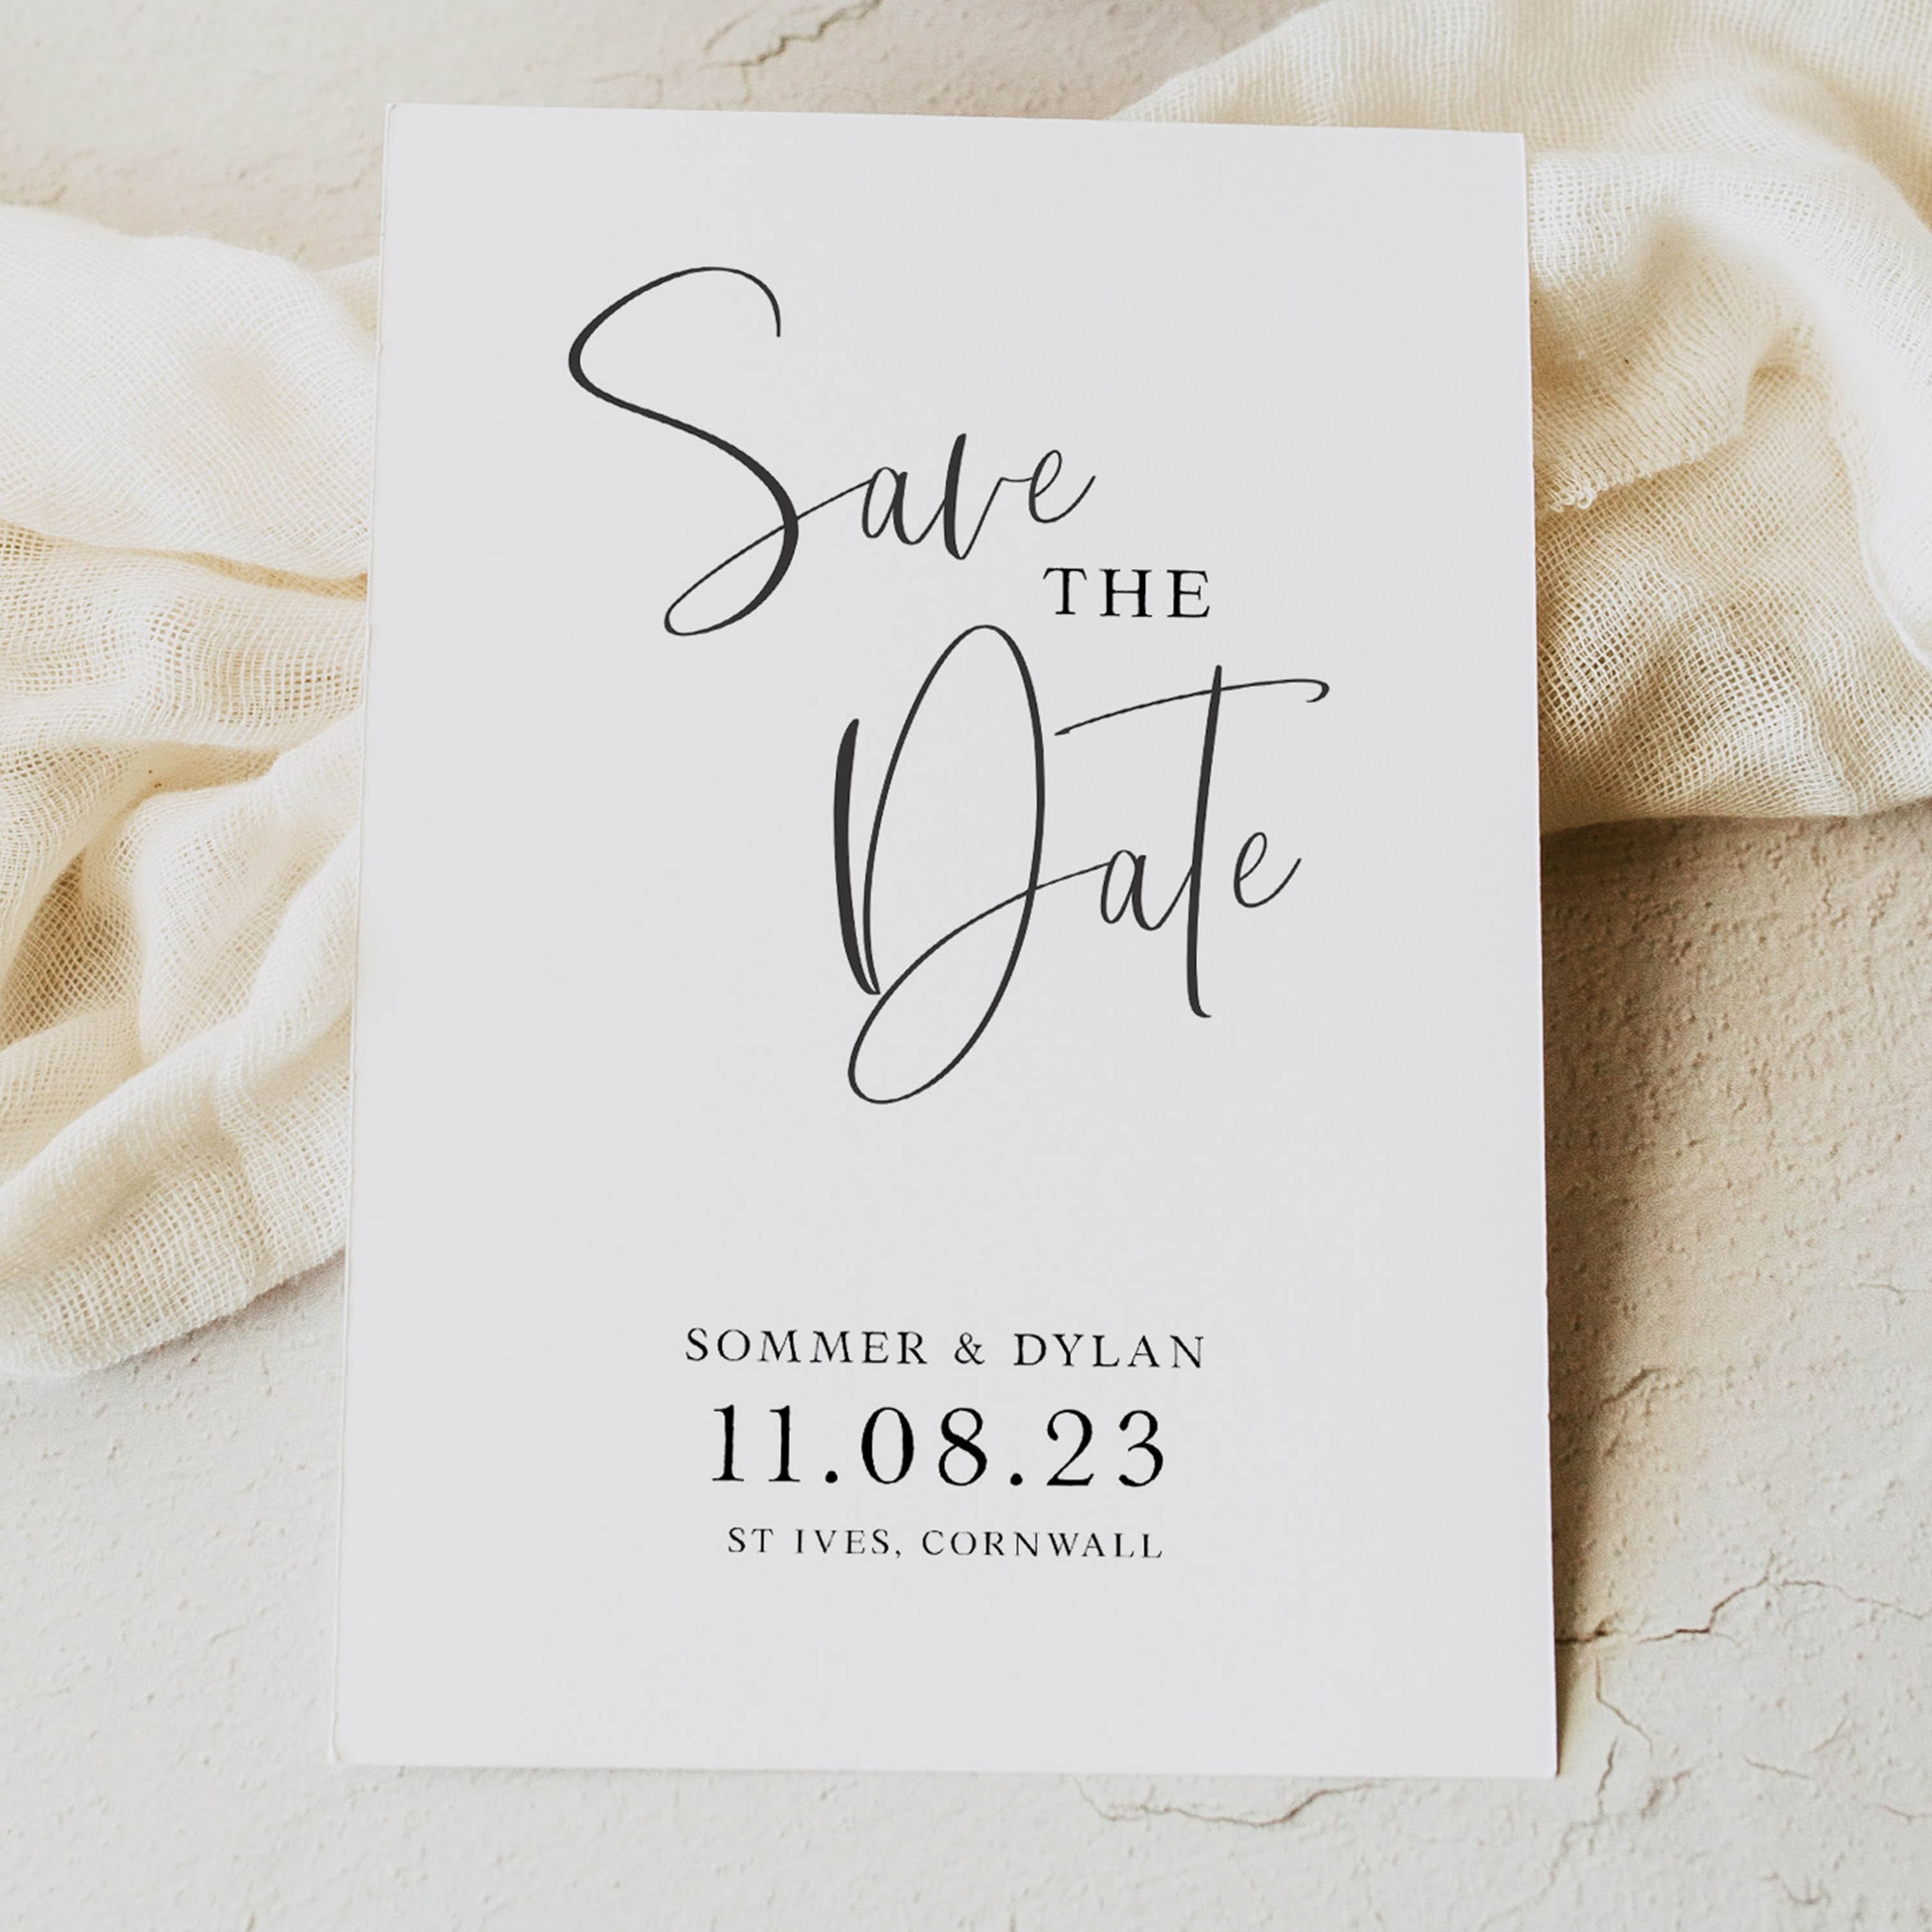 editable save the date card, printable save the date card, CALLIGRAPHY editable wedding invitation suite, editable wedding stationery, printable wedding stationery, modern wedding items, wedding save the dates